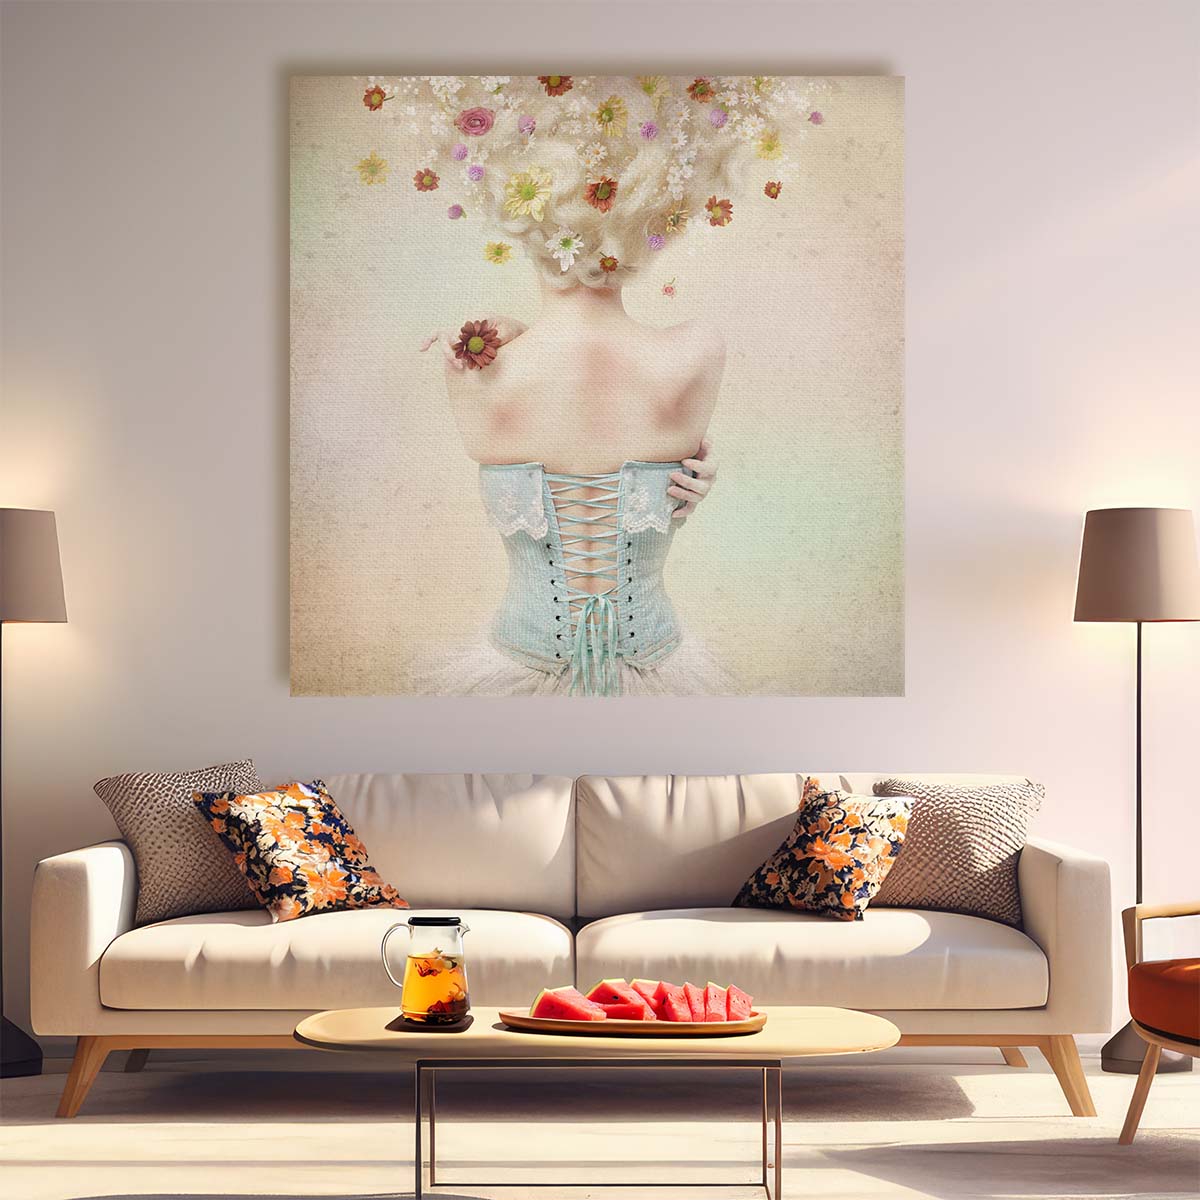 Classic Corseted Woman in Spring Floral Garden Portrait Wall Art by Luxuriance Designs. Made in USA.